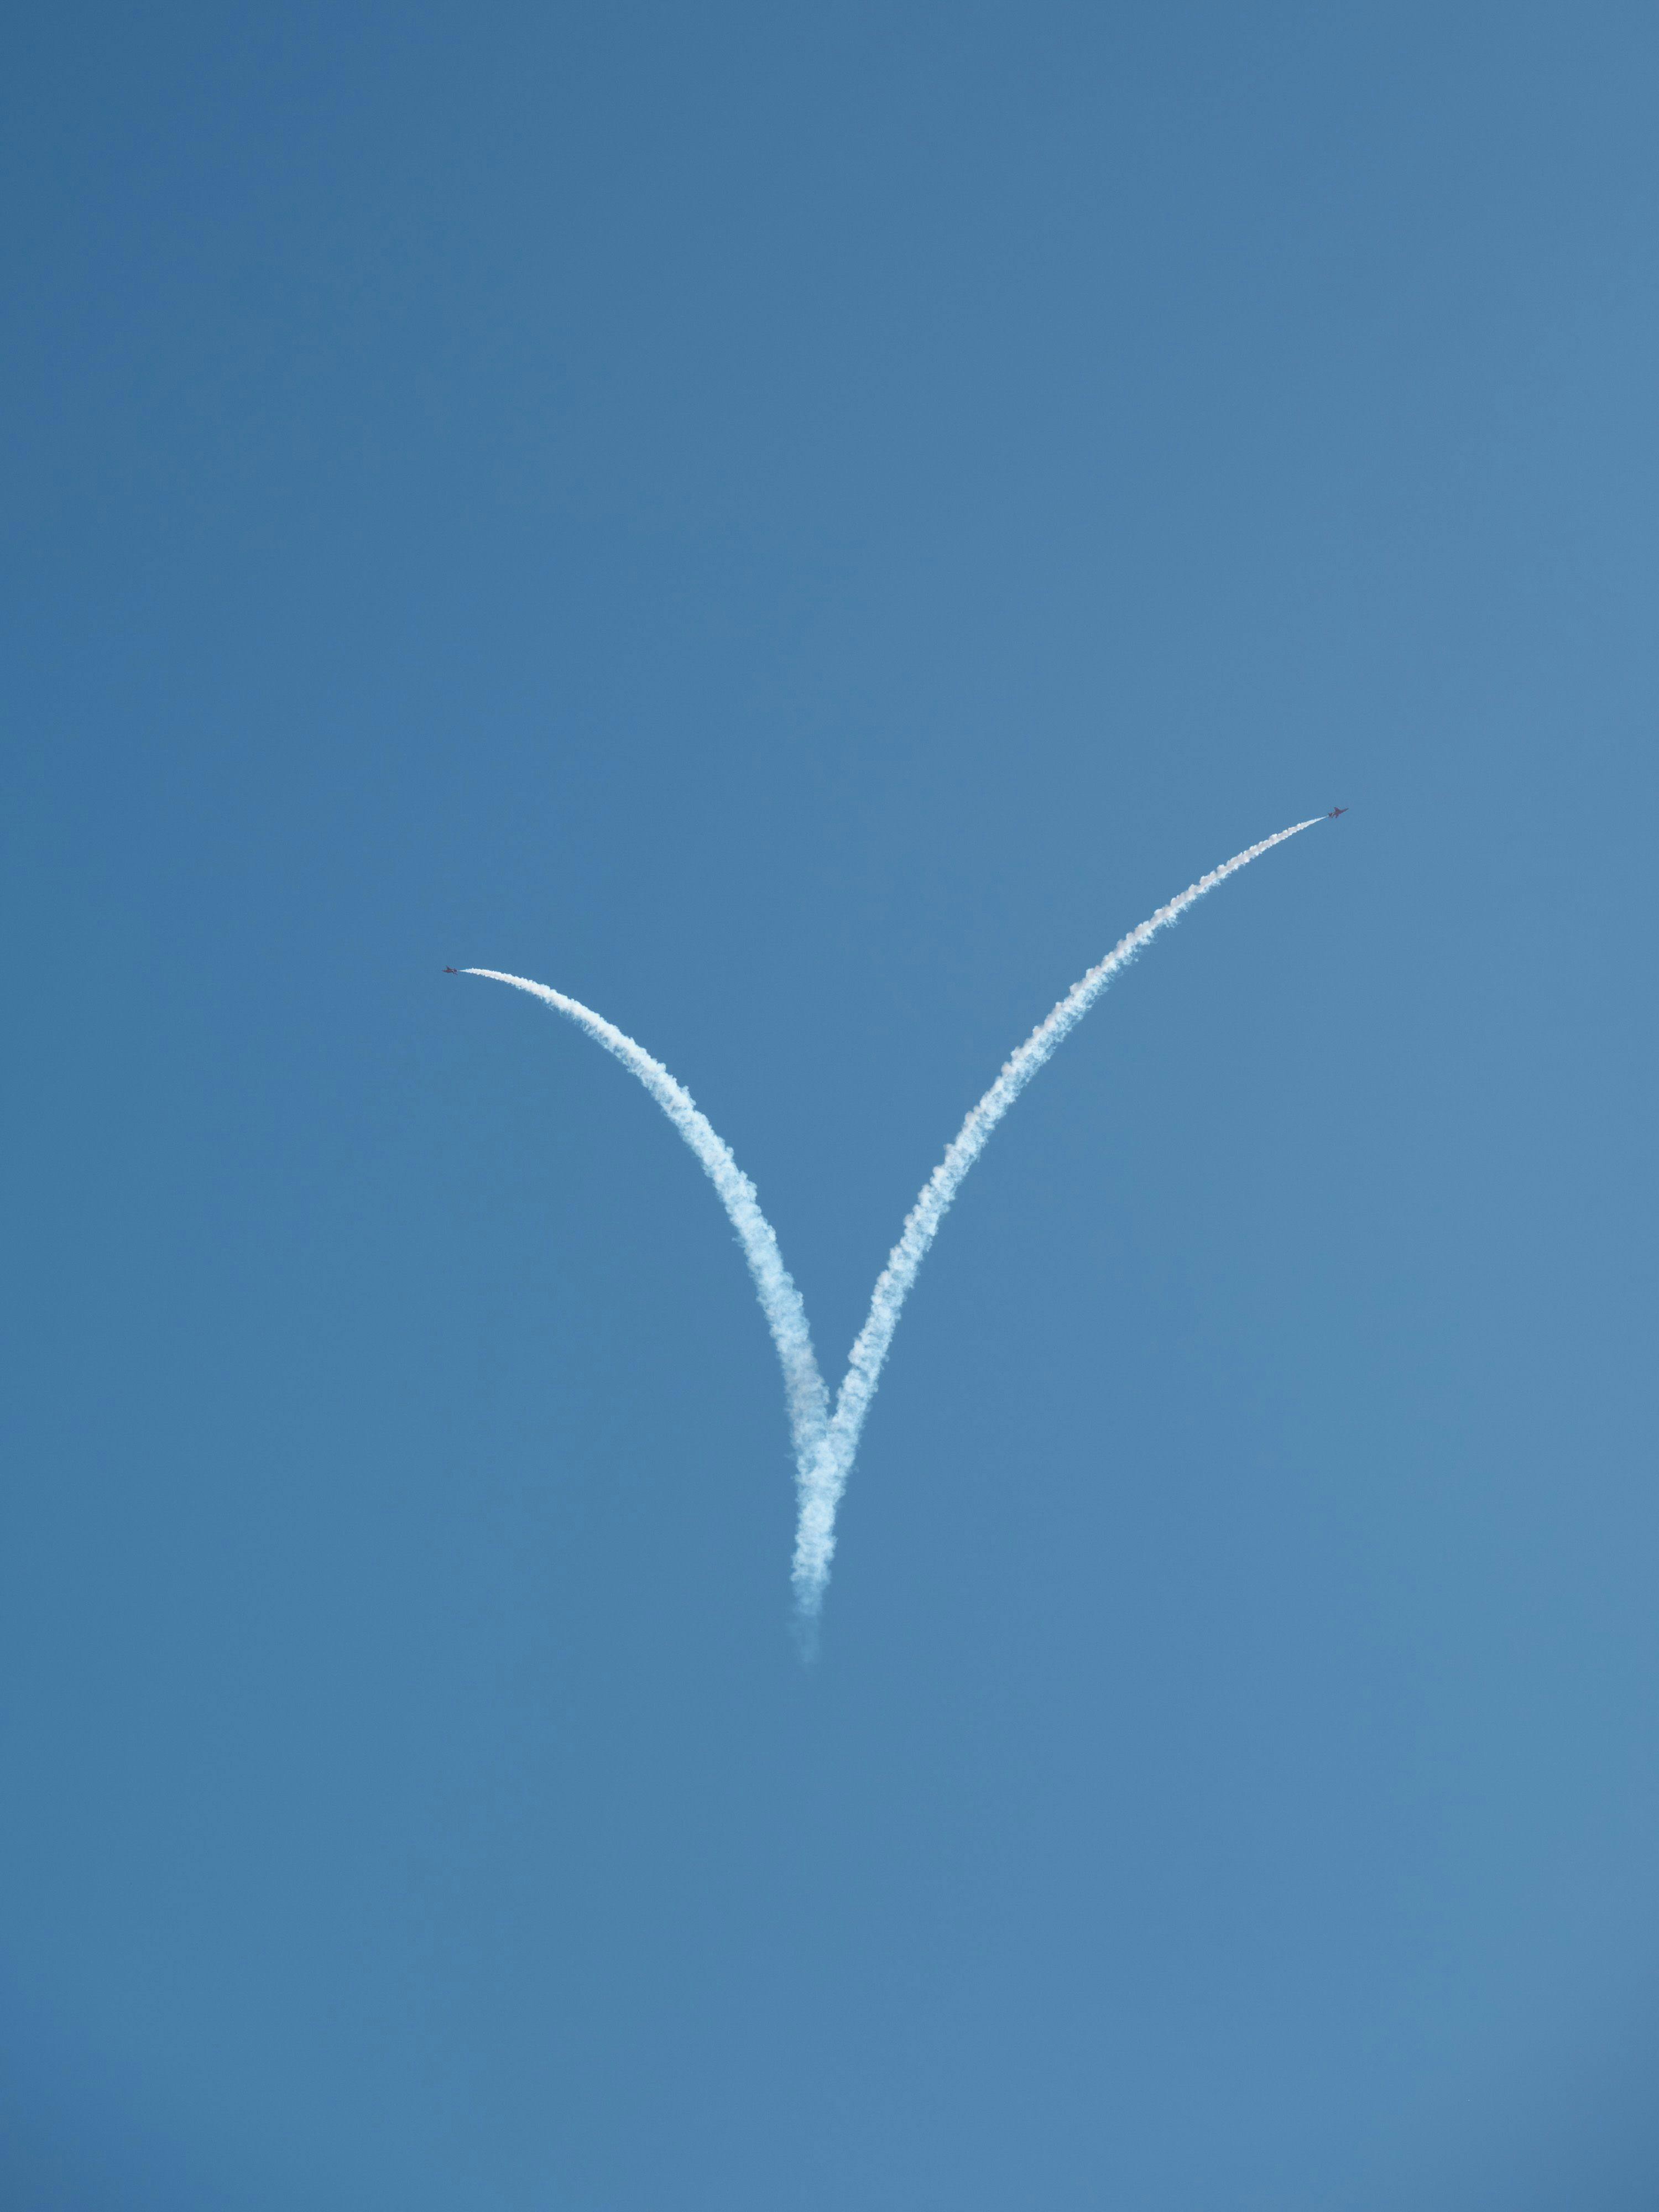 The Red Arrows in the process of forming a heart out of their smoke trailers, it currently forms a "V"